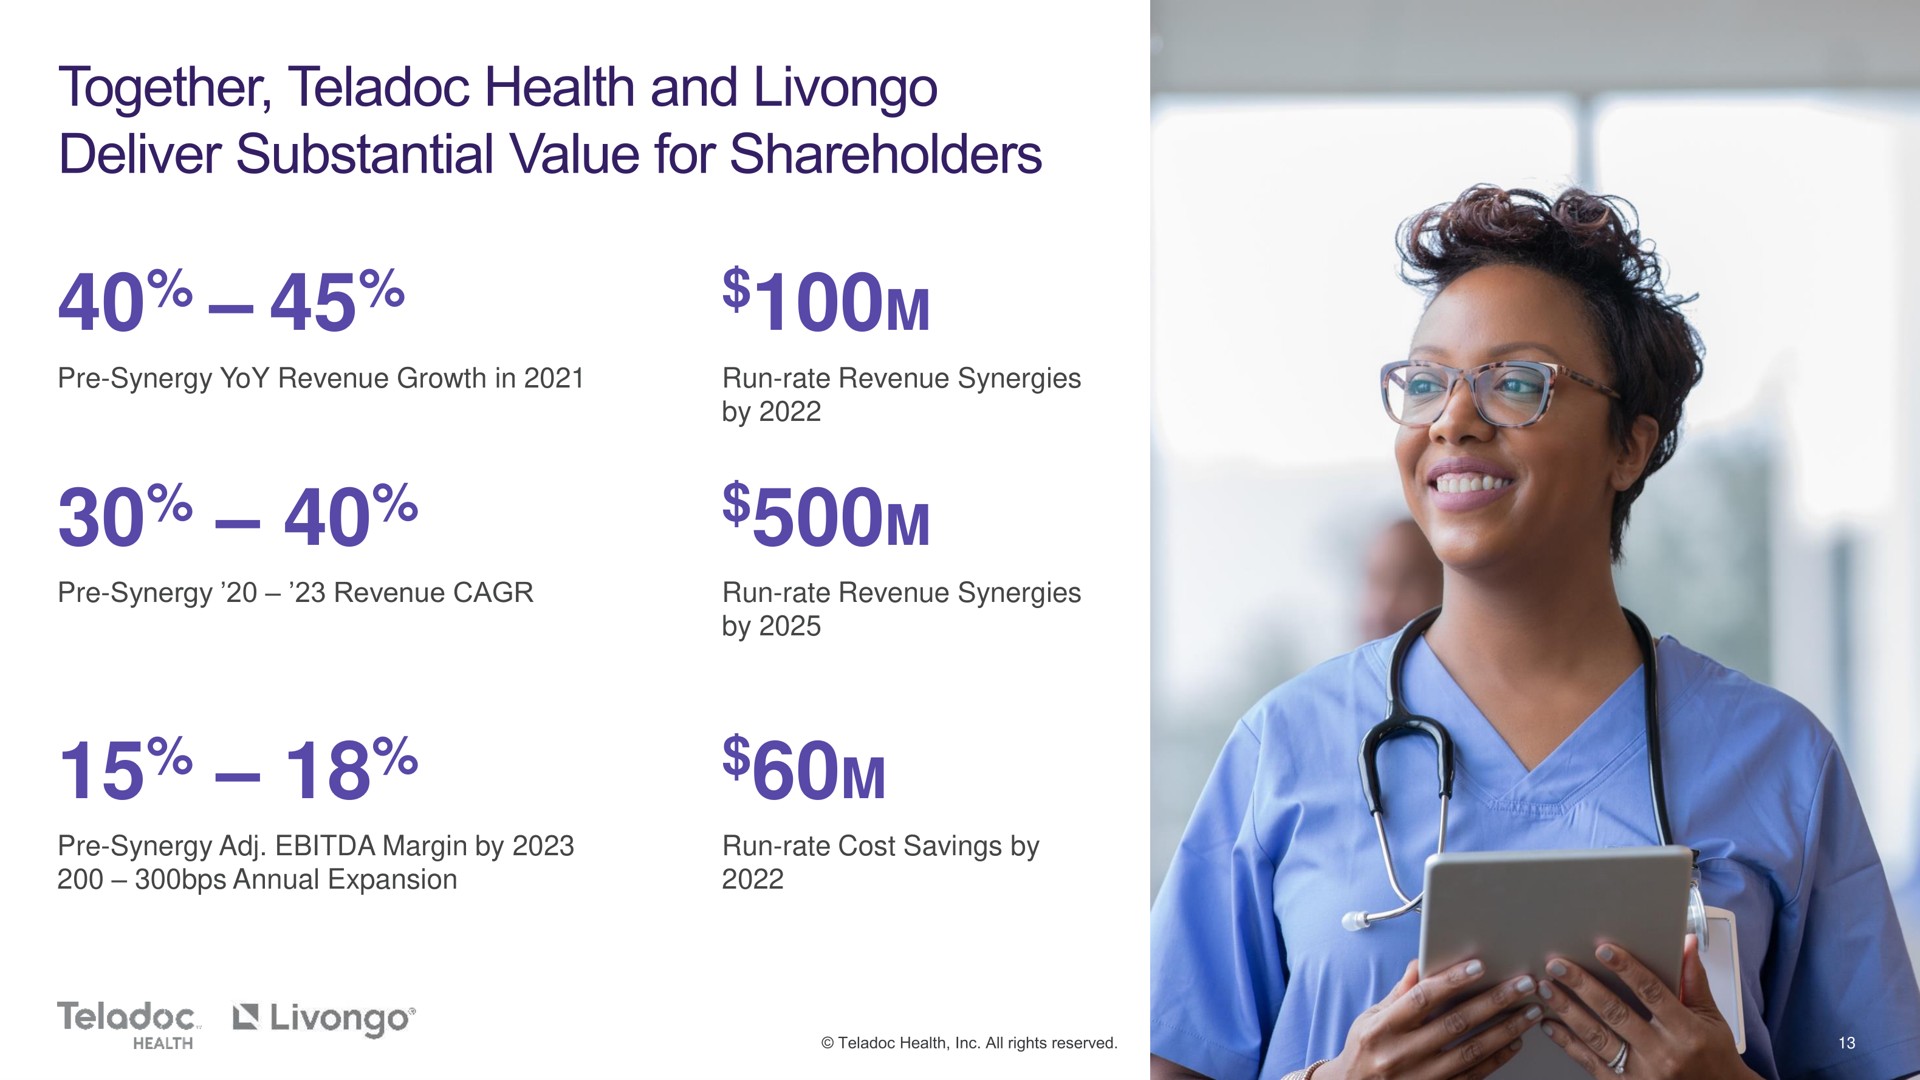 together health and deliver substantial value for shareholders | Teladoc